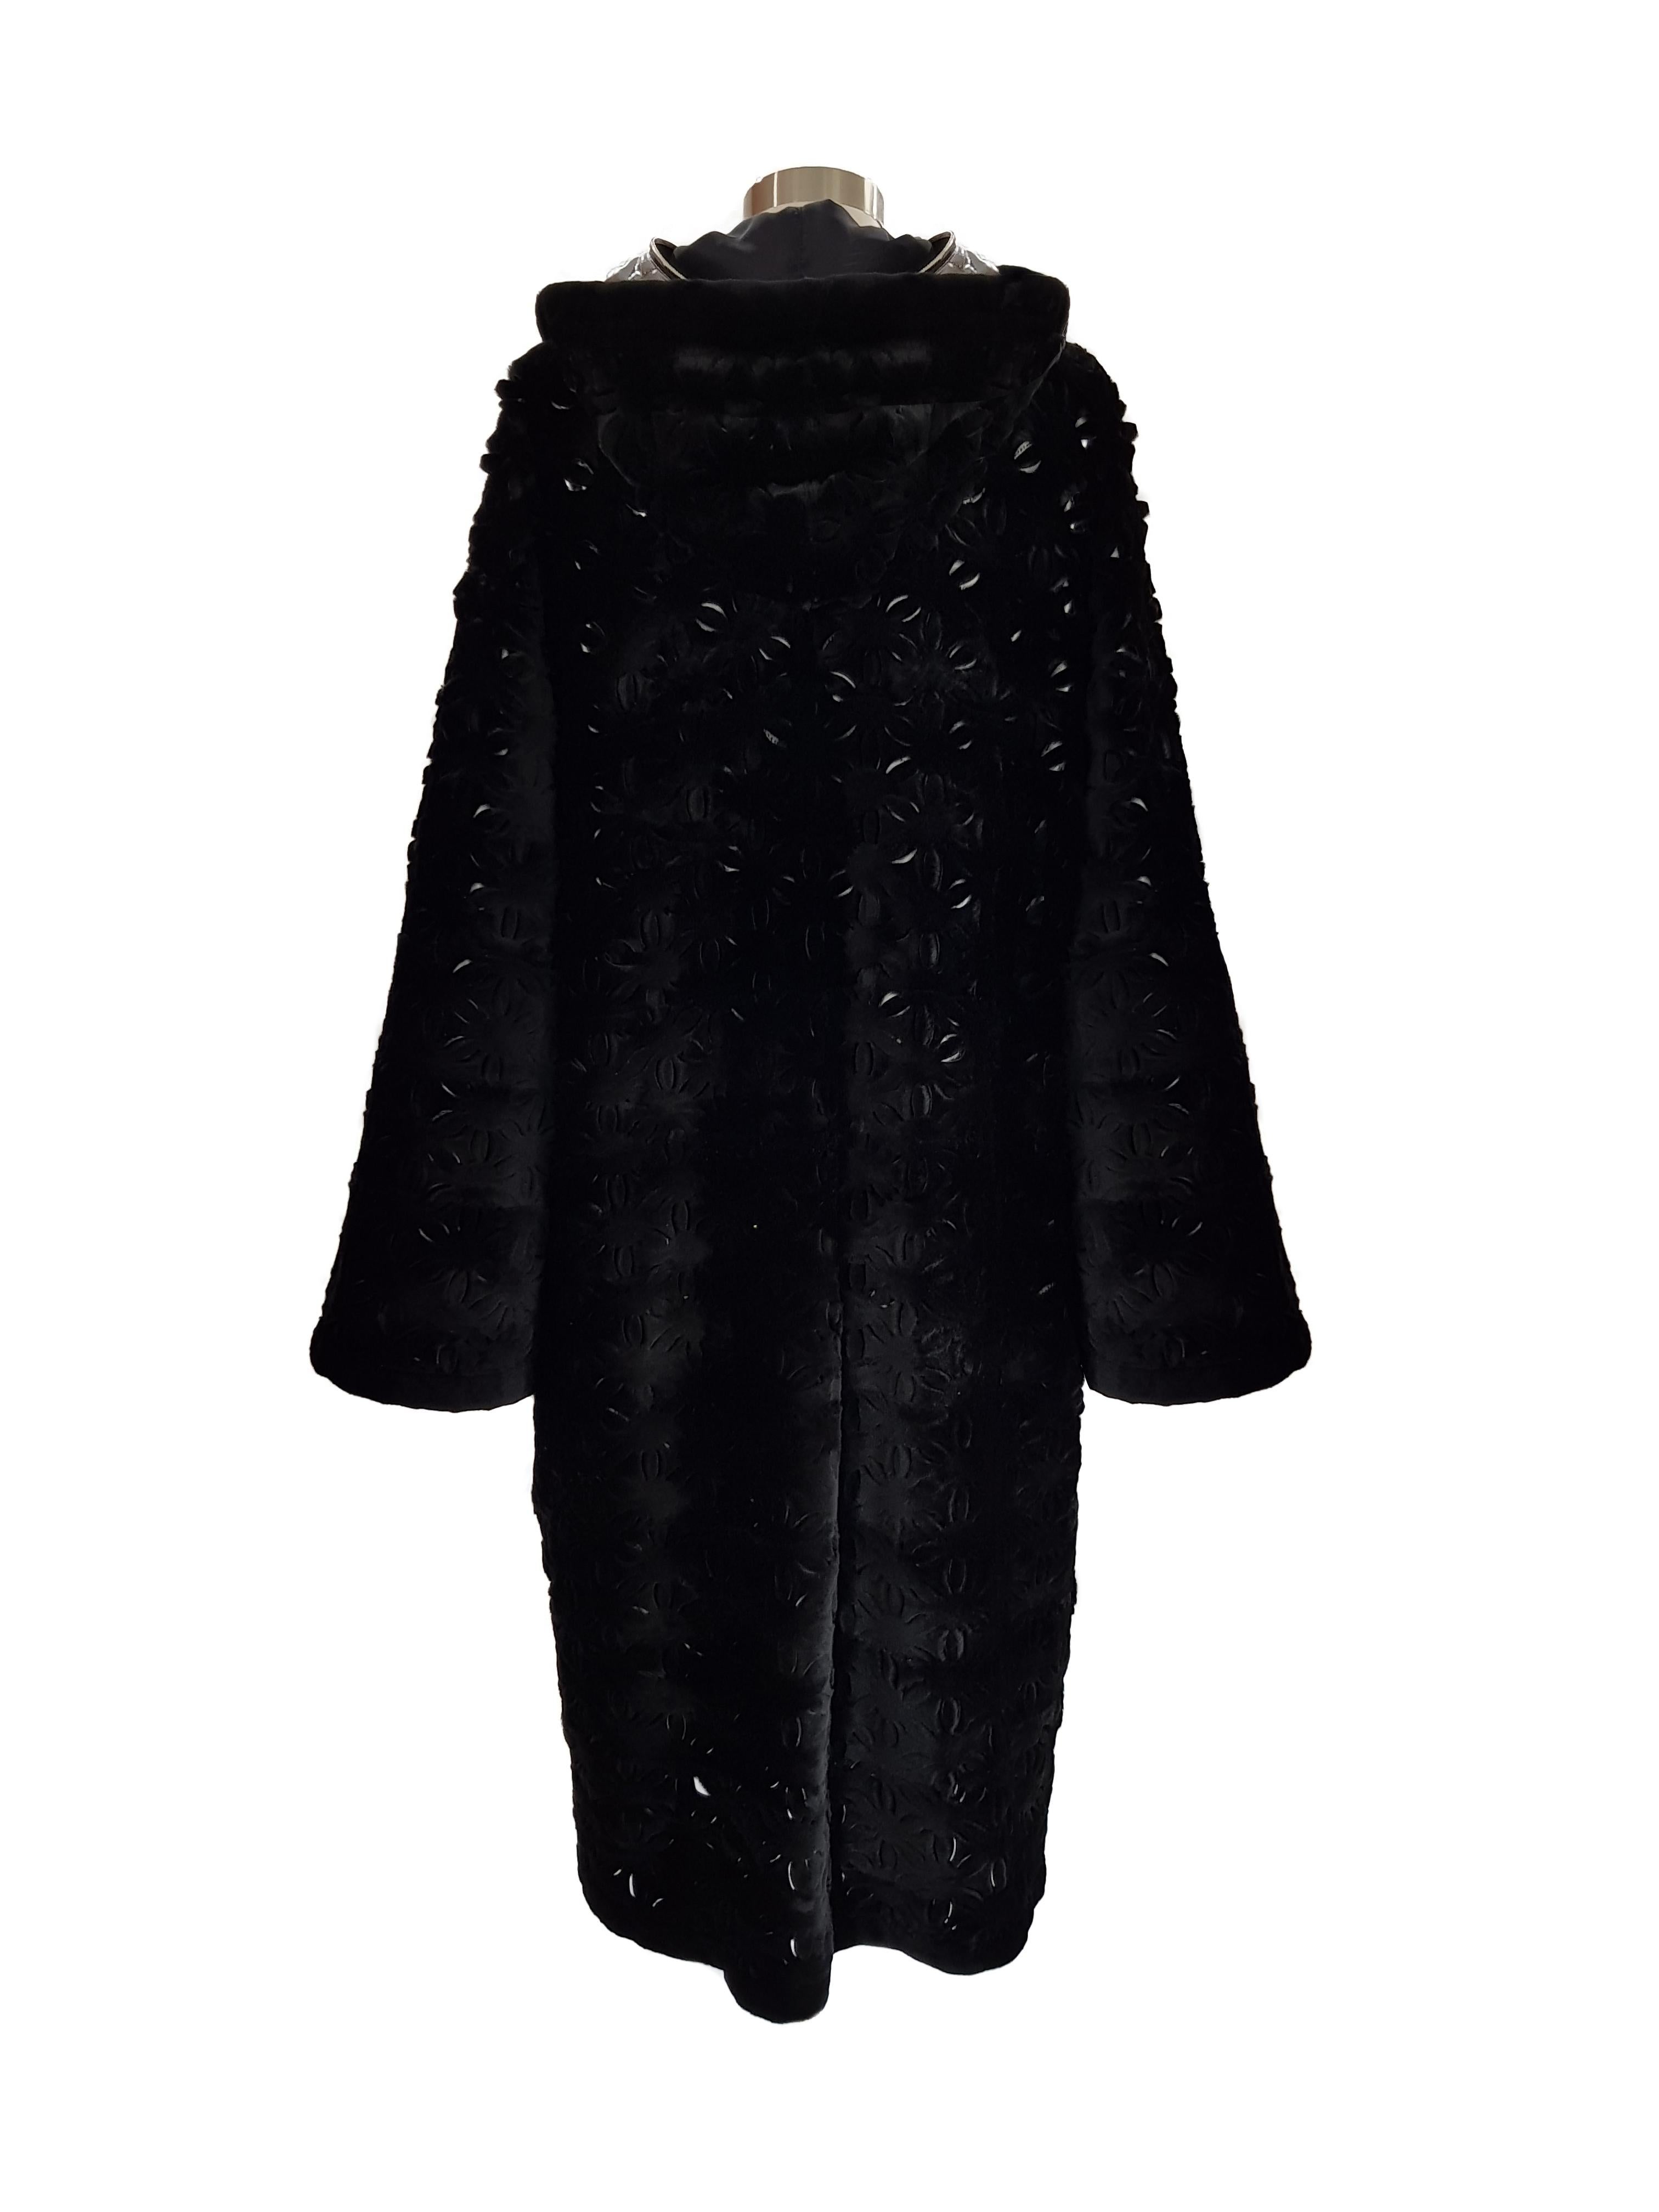 Reversible hooded dyed sheared mink coat with snap closure. Silver rain detachable lining.